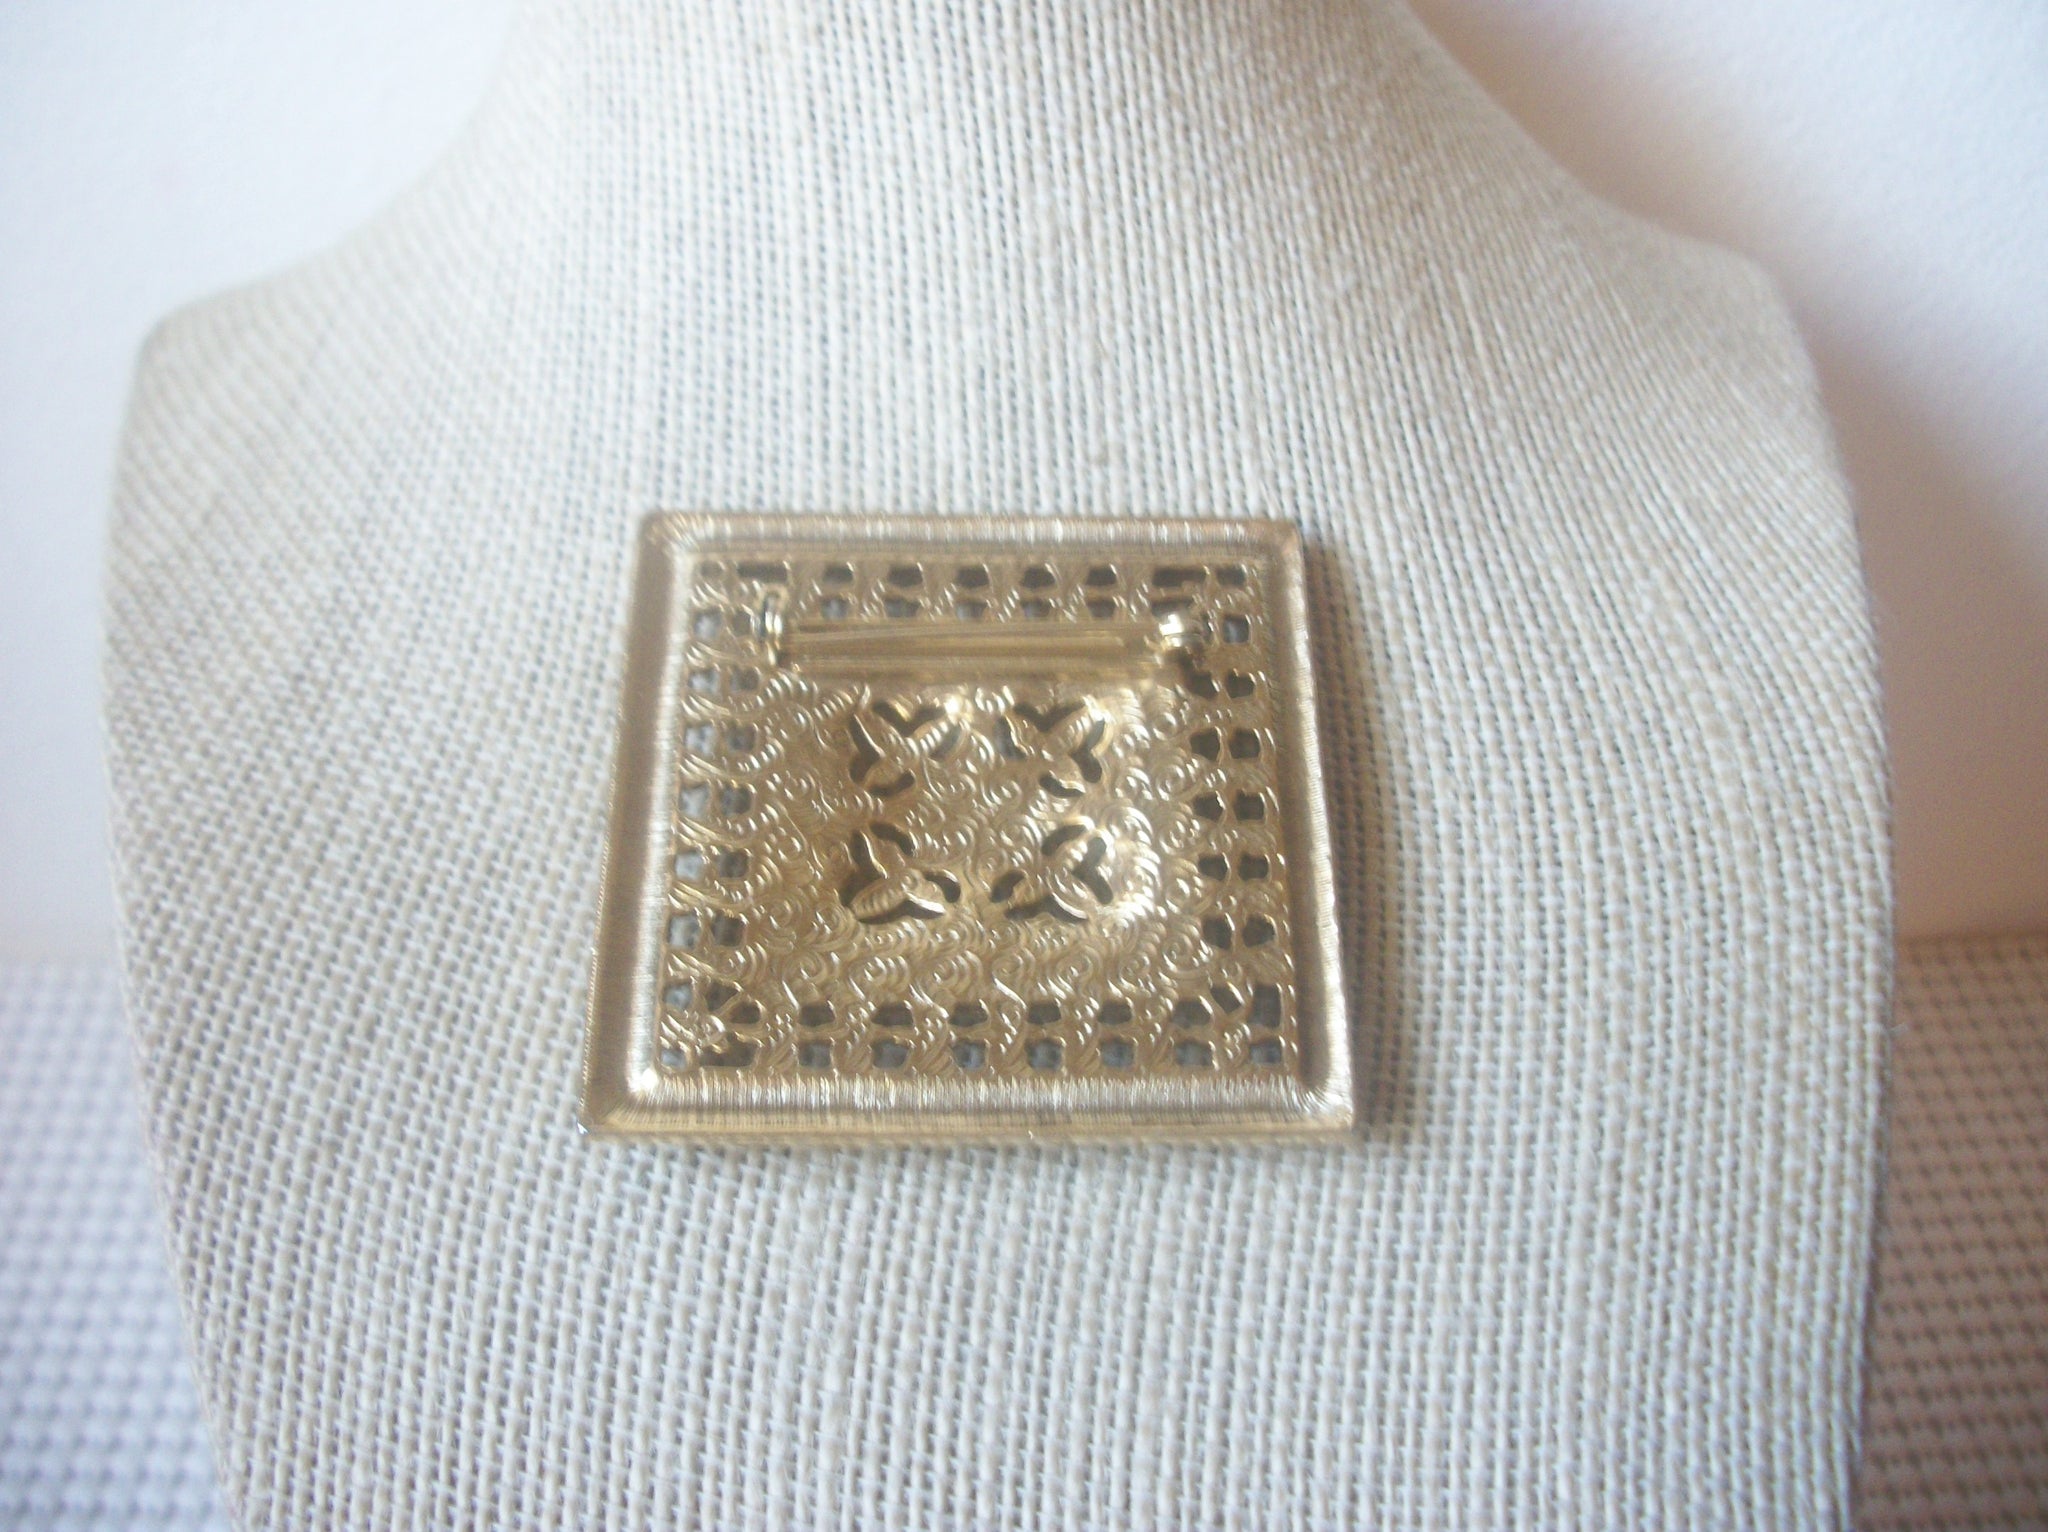 Larger, Spanish Damasque, Gold Tone, Square Black Faux Stone, Vintage Brooch Pin 60218